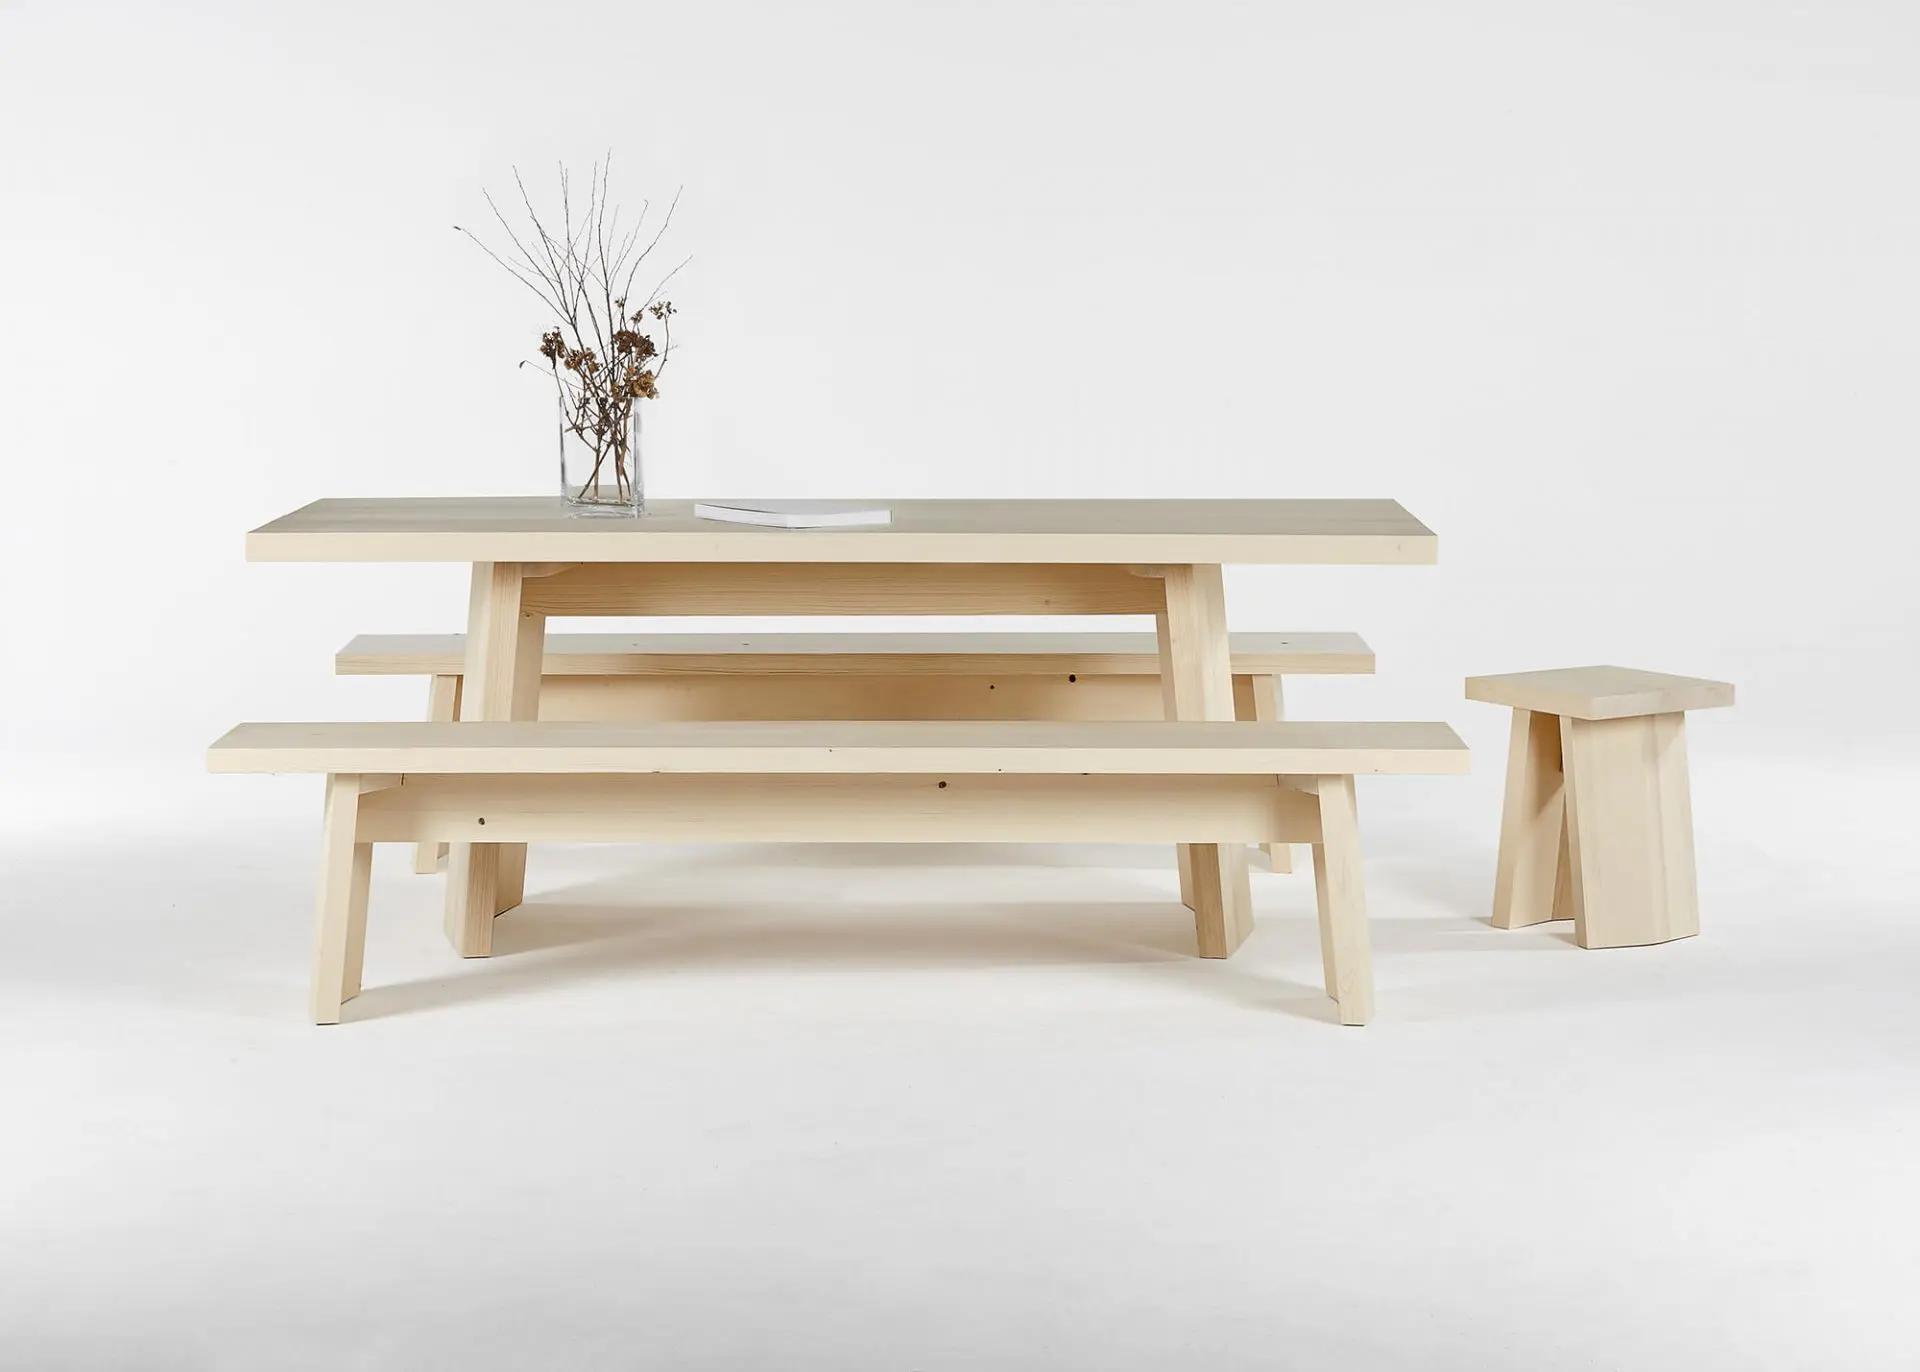 MAZEL wooden furniture collection by Fabien Roy - Table, bench and stool